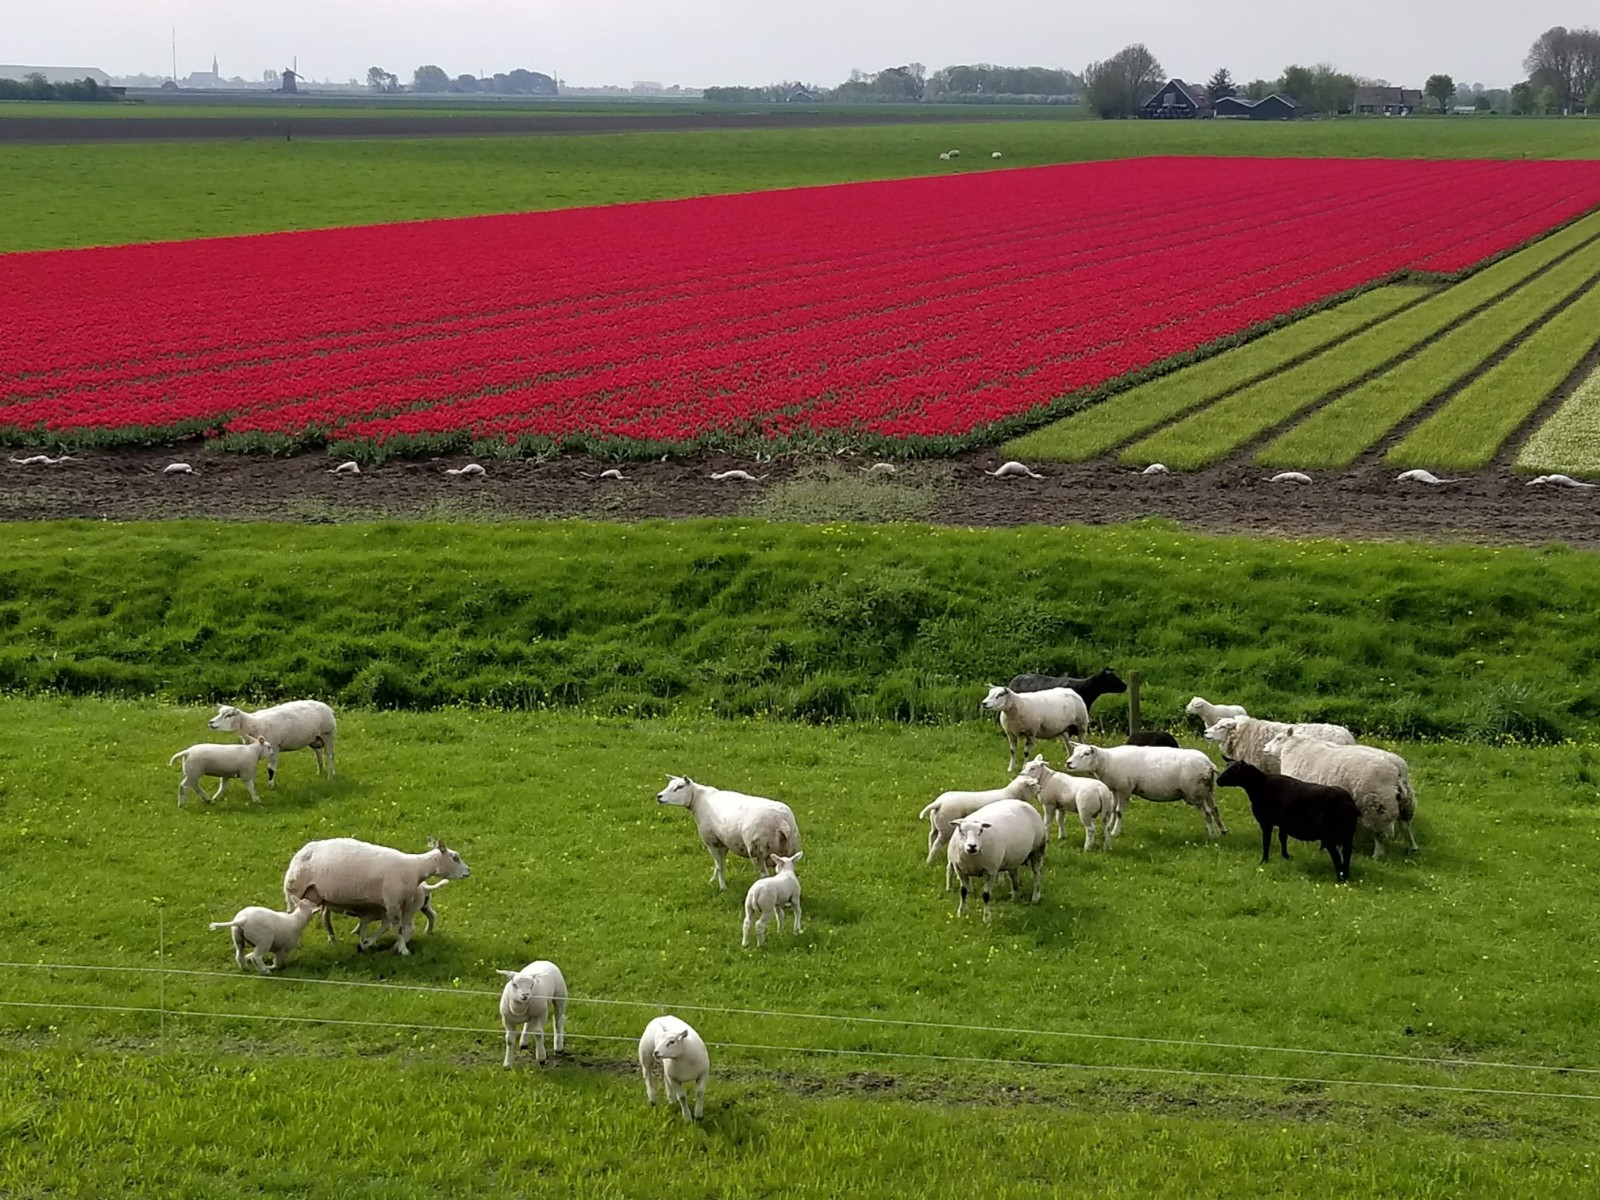 Sheep and tulips in the background